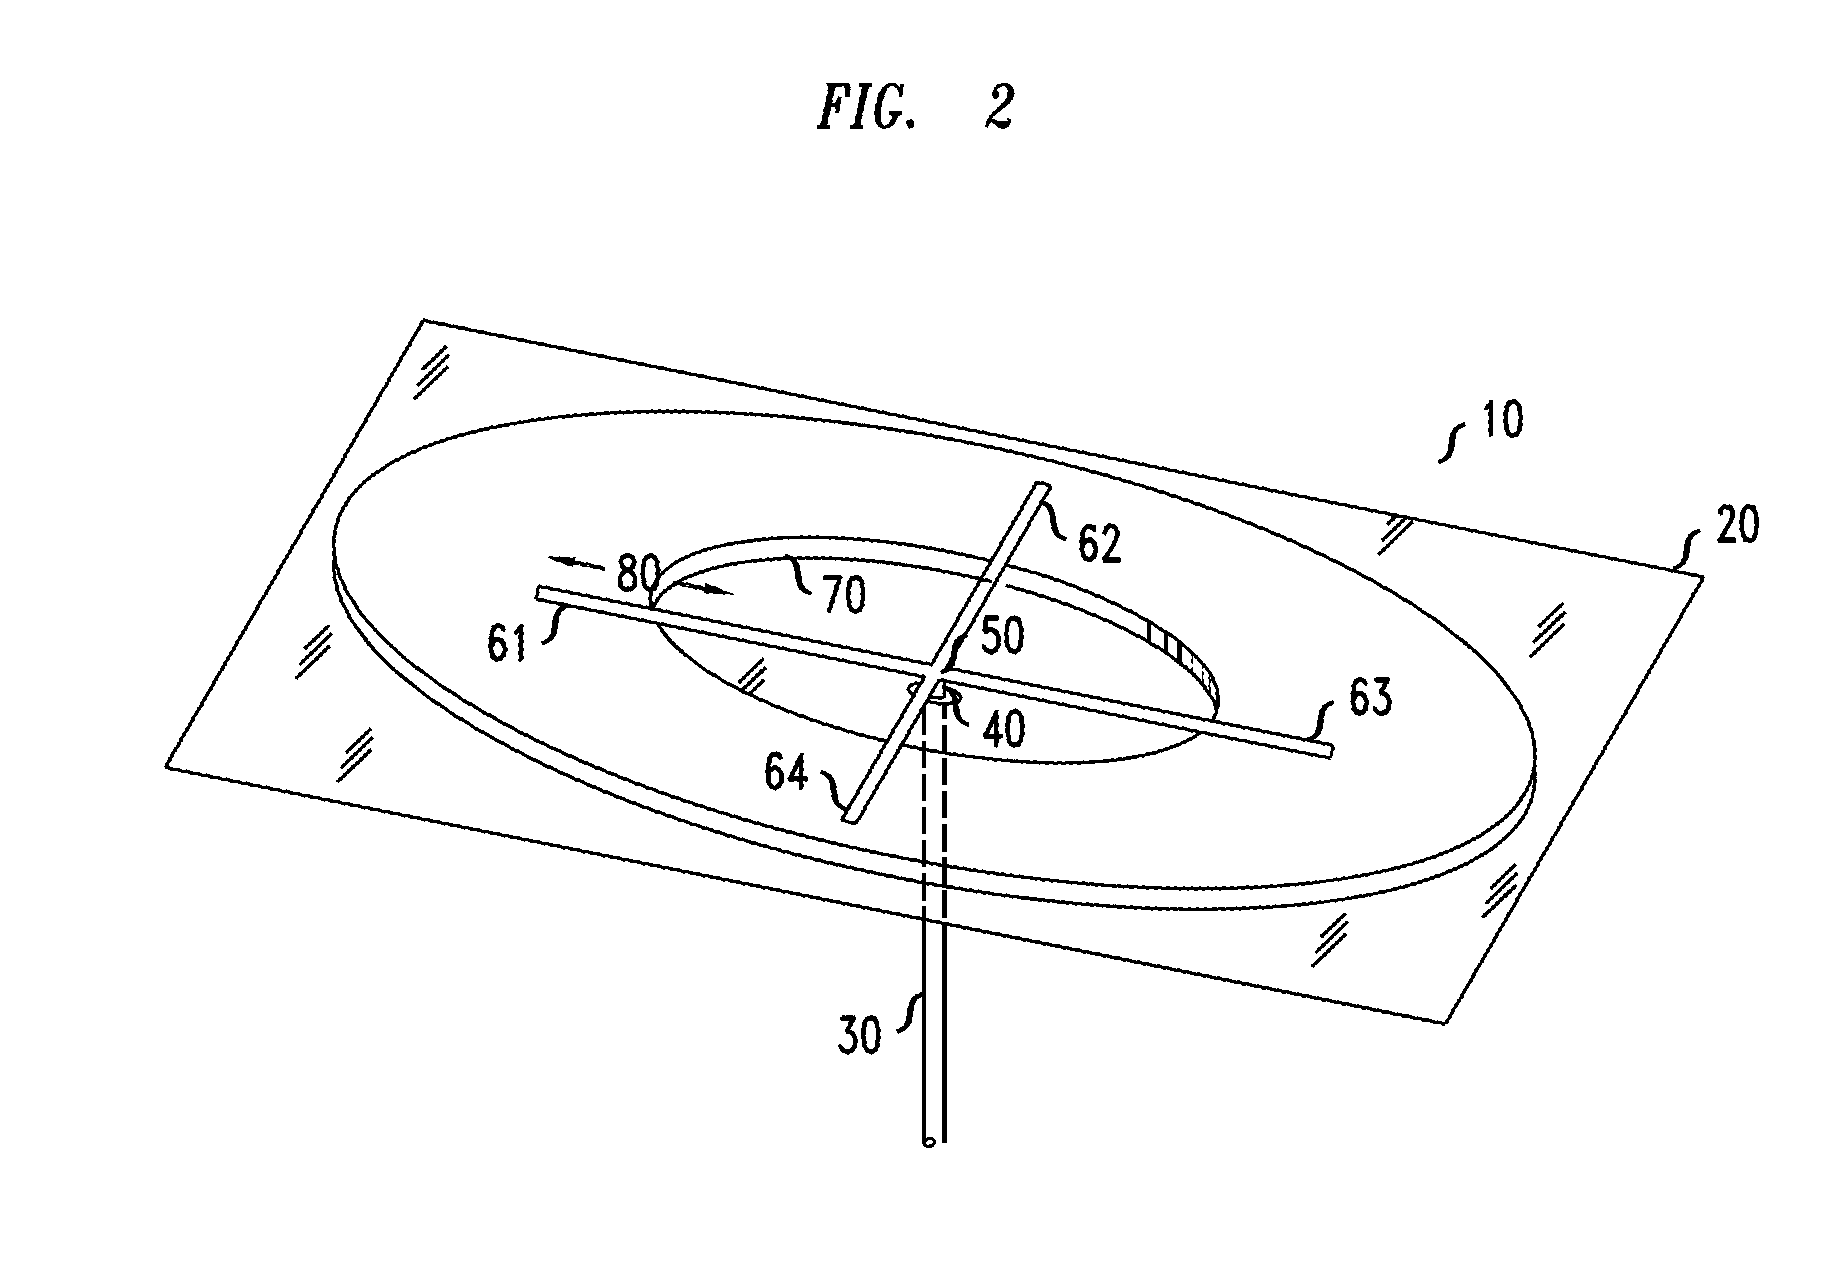 Low-aspect antenna having a vertical electric dipole field pattern